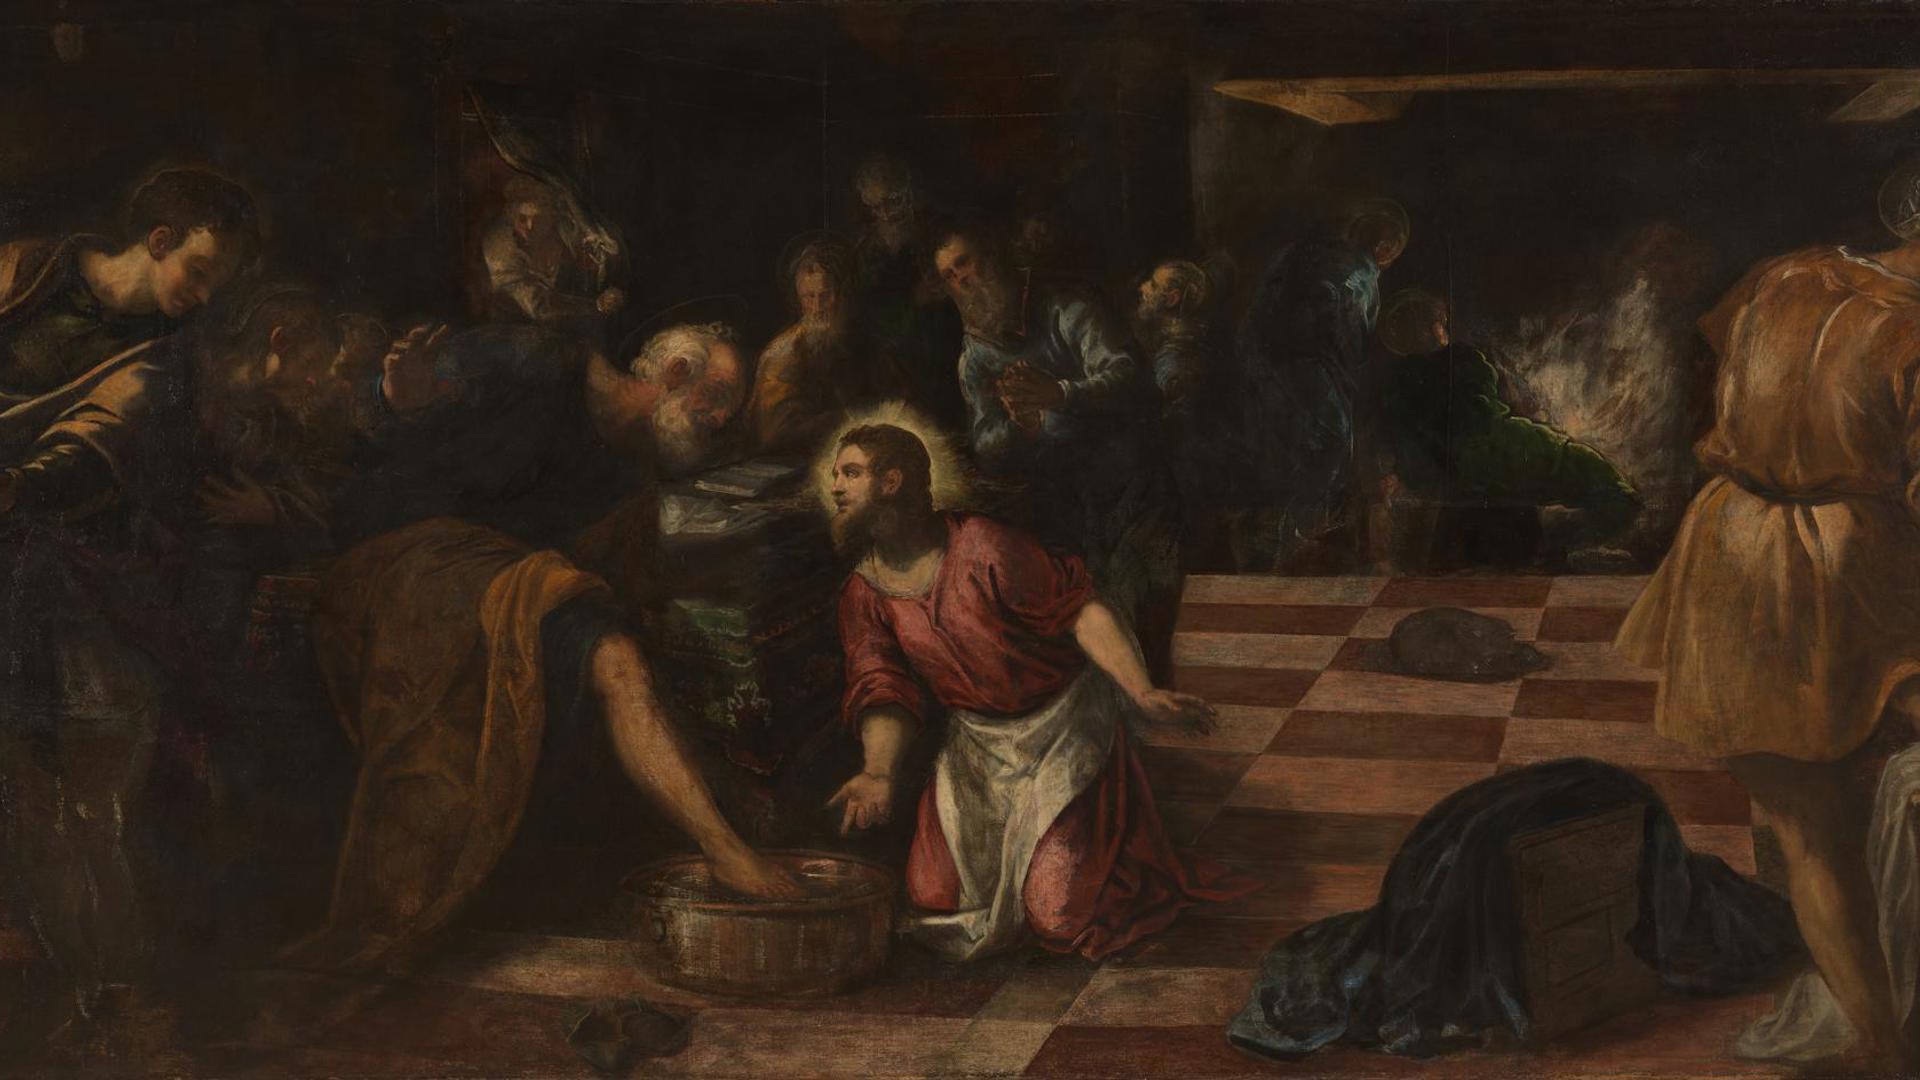 Christ washing the Feet of the Disciples by Jacopo Tintoretto